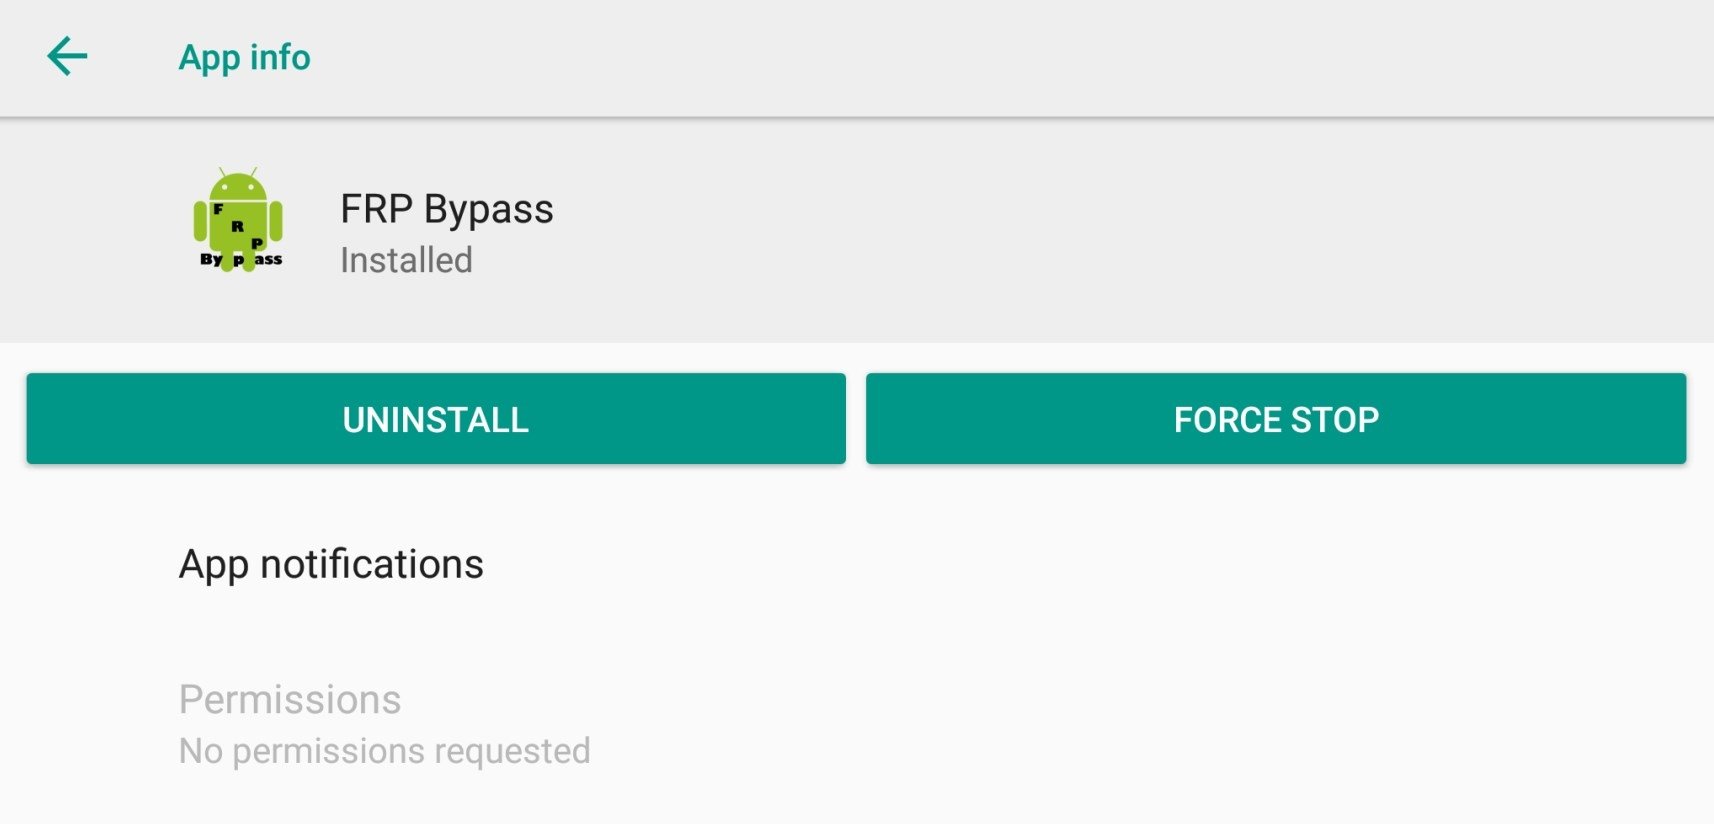 android 11 frp bypass apk